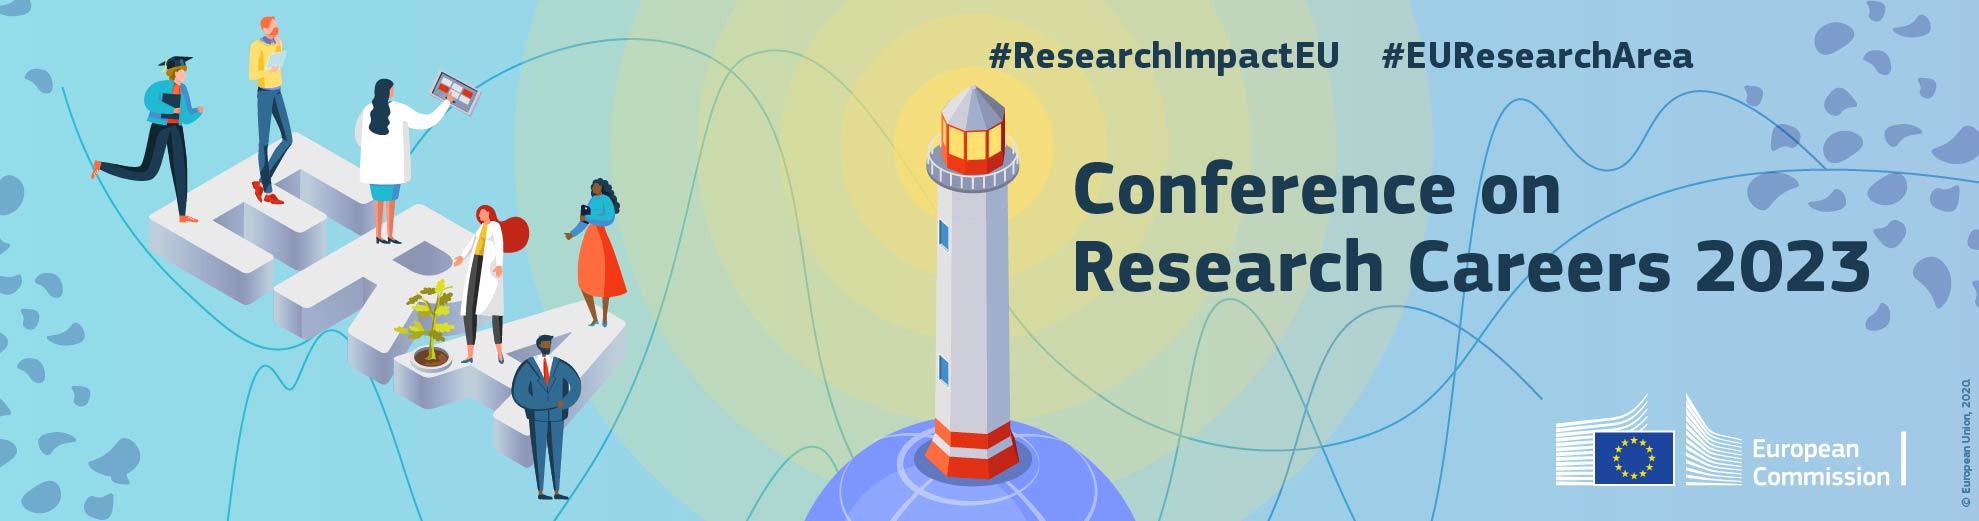 Conference on Research Careers 2023